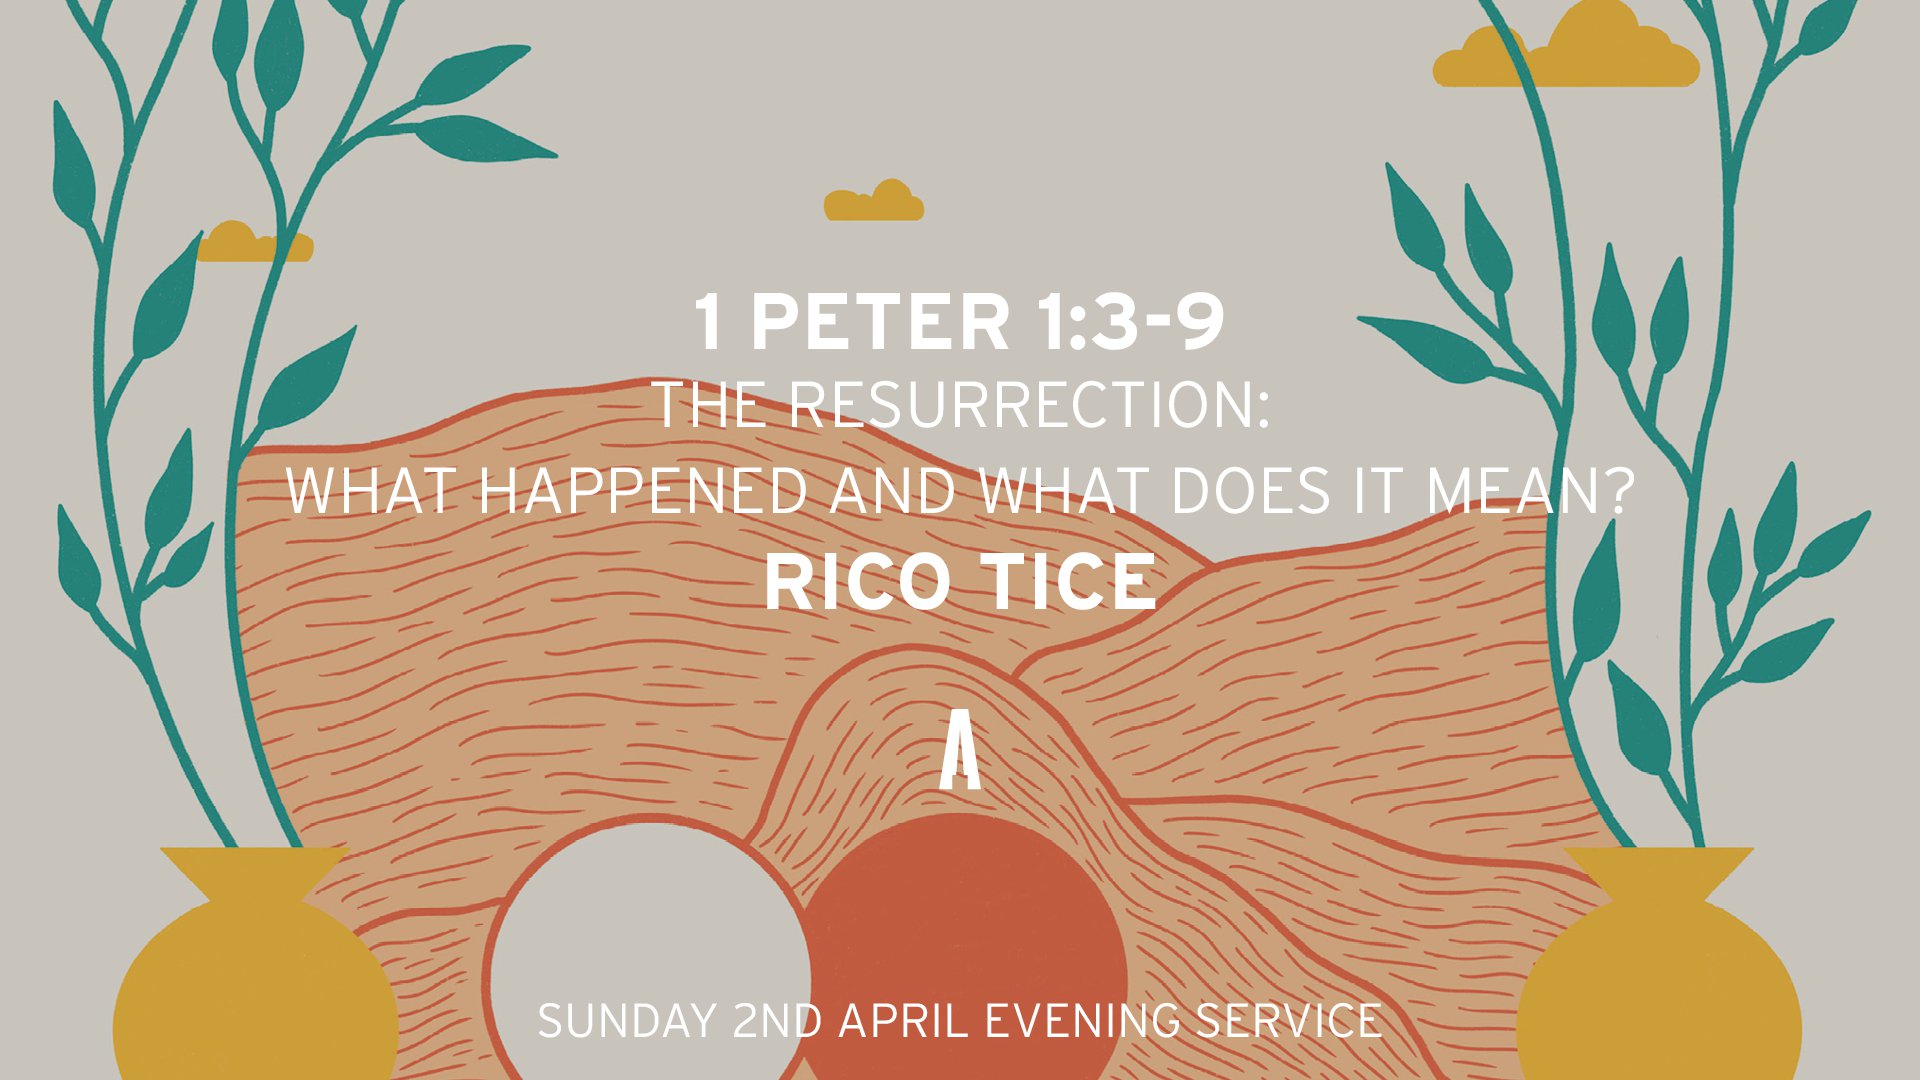 The Resurrection: What happened and what does it mean?